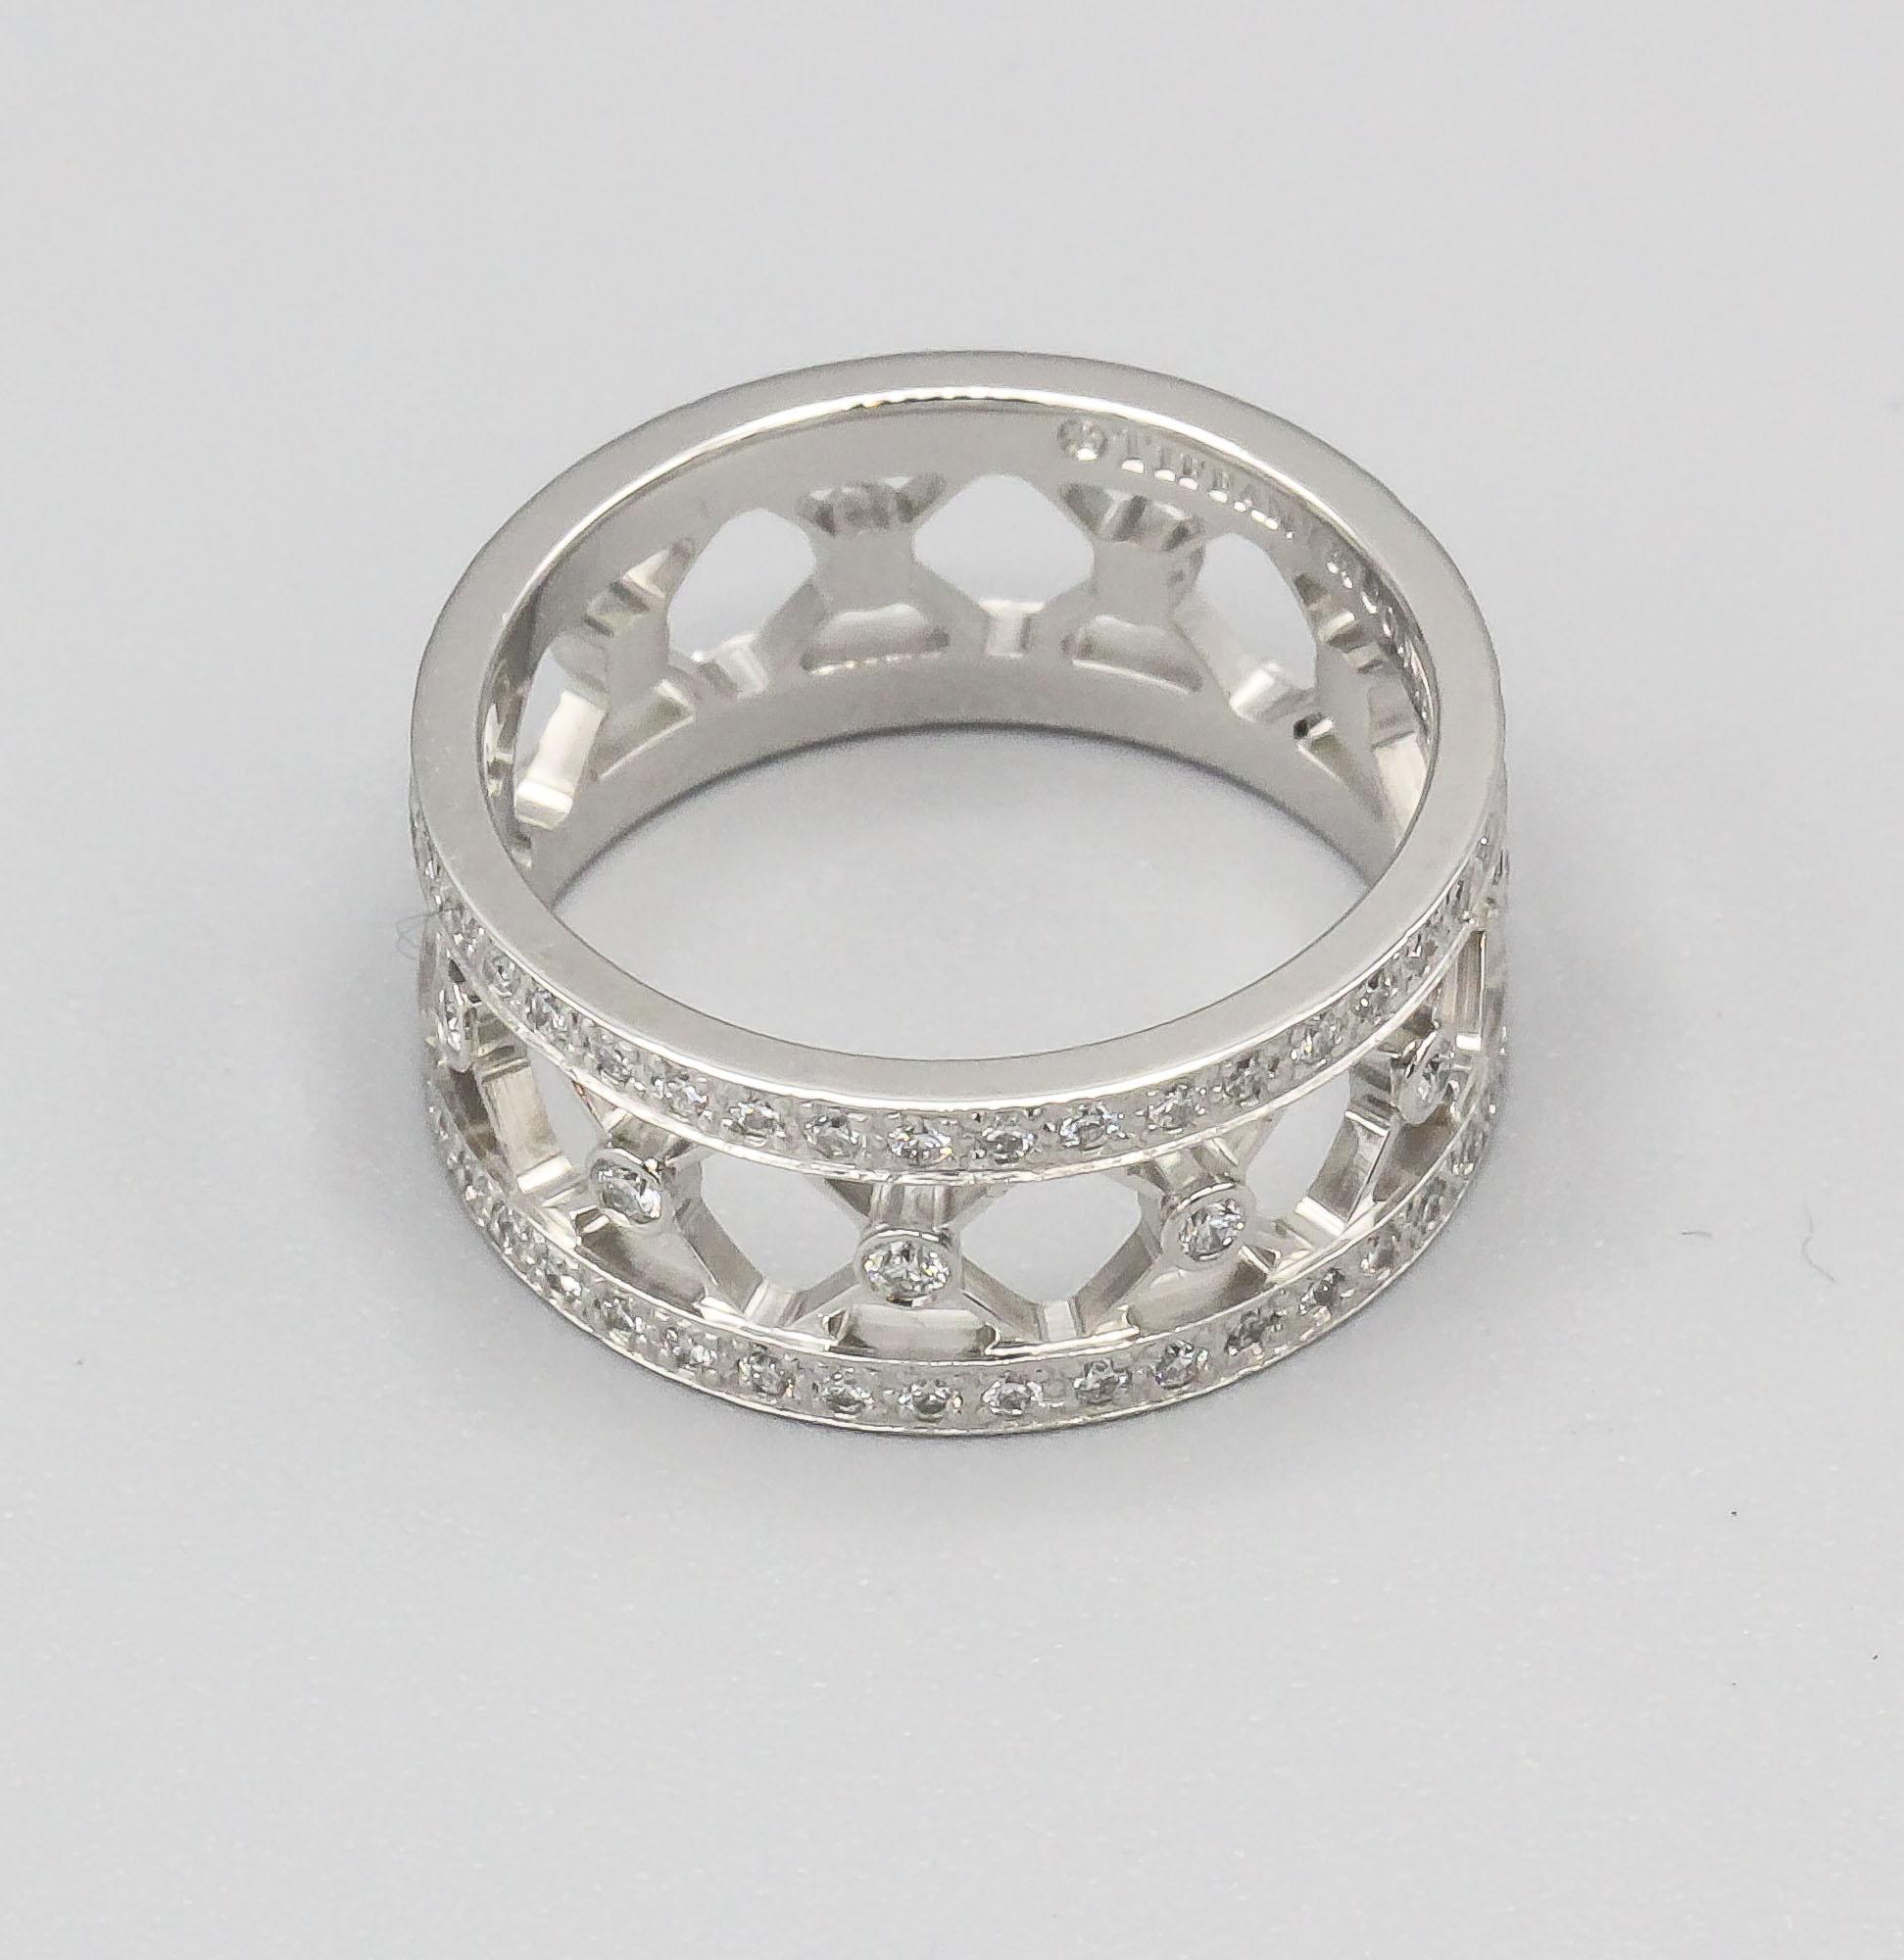 Contemporary Tiffany & Co. Voile Diamond and Platinum Band Ring sz. 5.25 For Sale